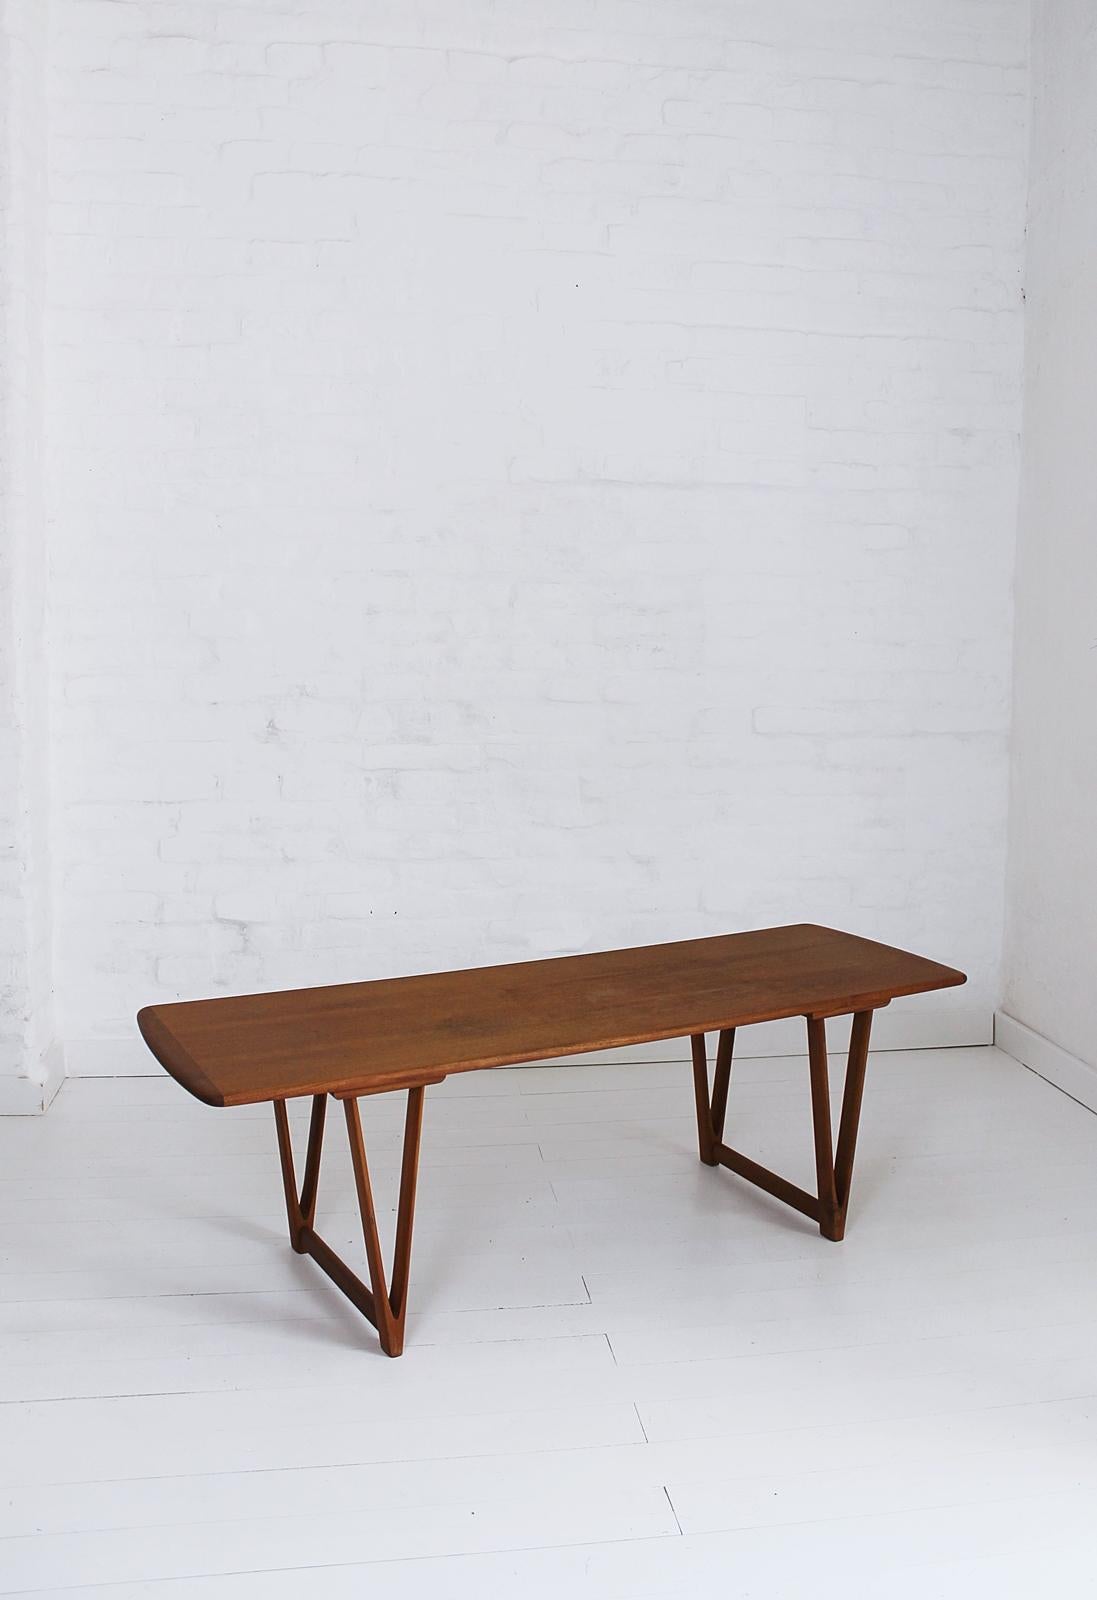 Stylish and rare Danish Mid-Century Modern teak table on V-shaped legs. Designed by Andreas Hansen and made by Arrebo Mobler in the 1960s. Is in good condition. The surface of the tabletop is slightly damaged as shown in the pictures. Label to